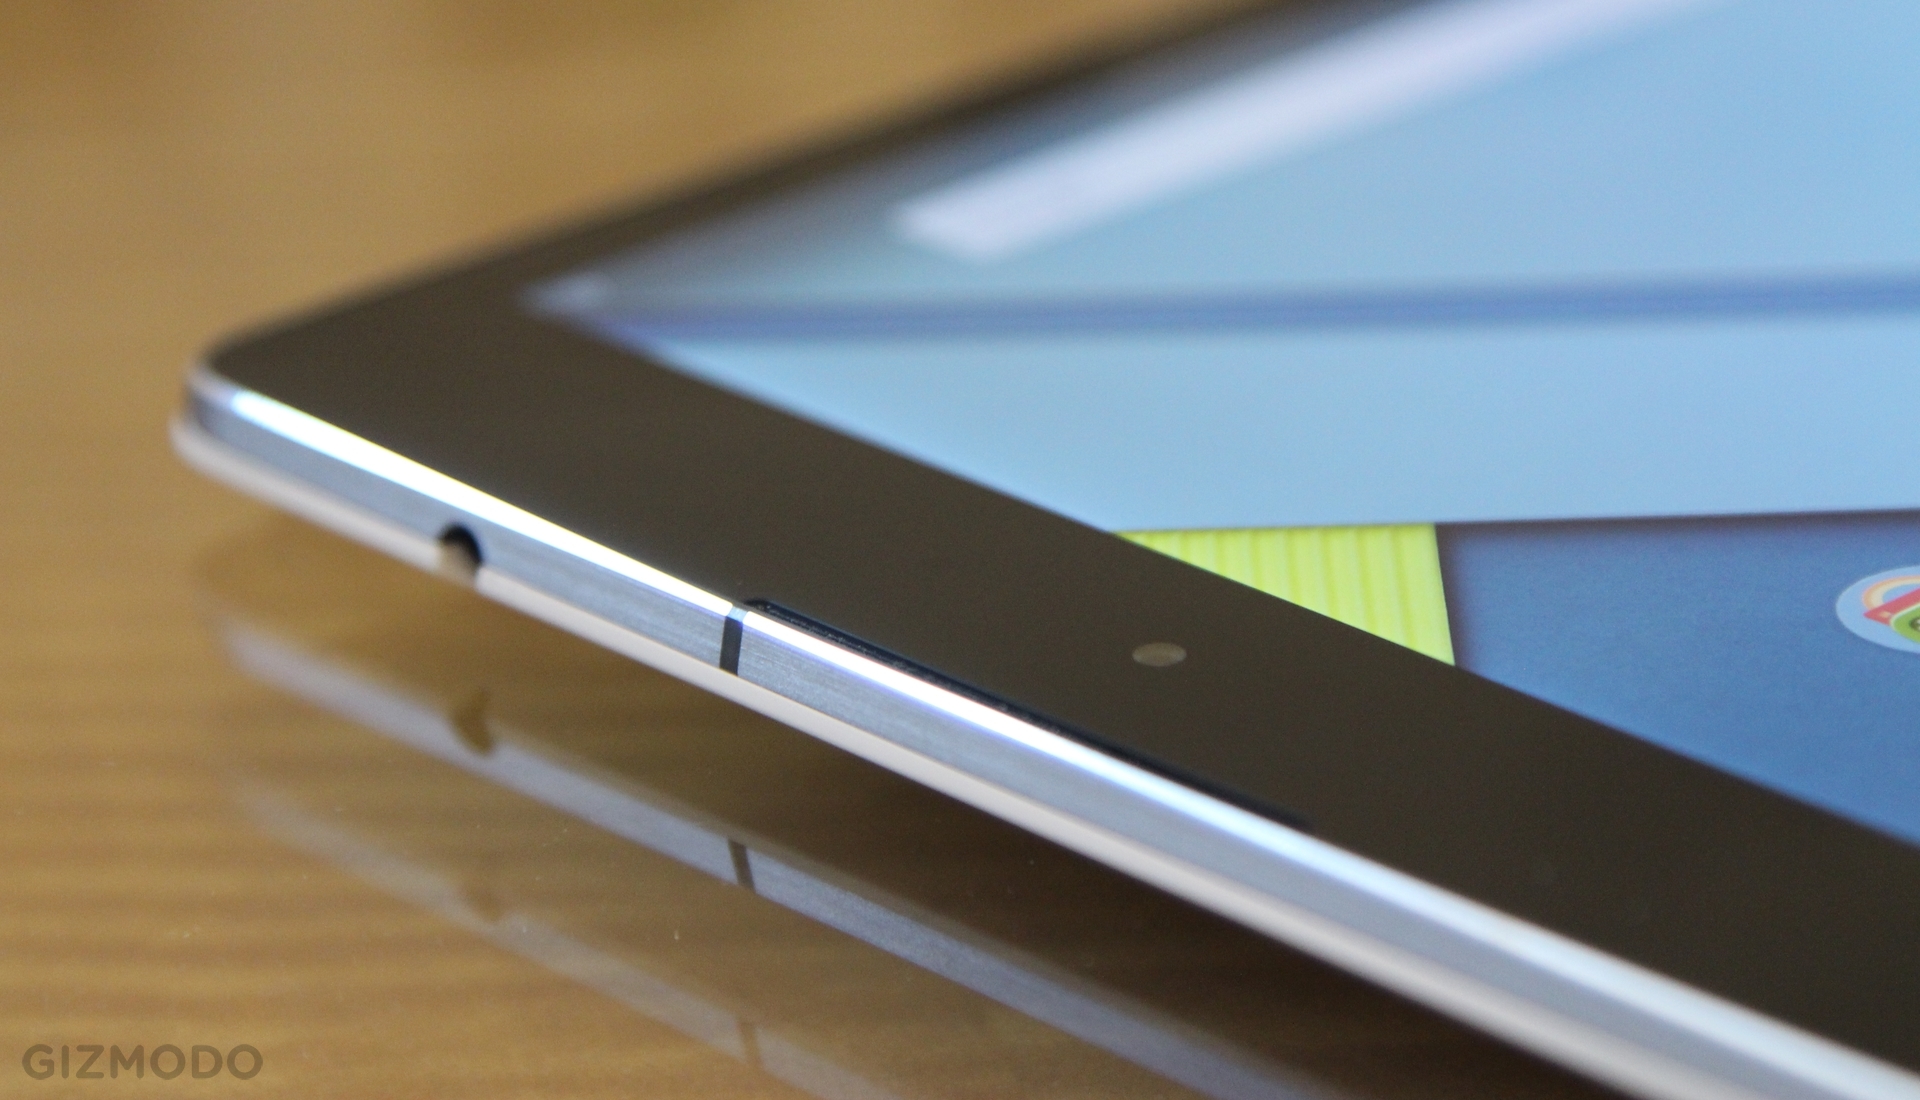 Nexus 9 Hands-On: Android’s iPad Air Is A Looker, Not A Stunner